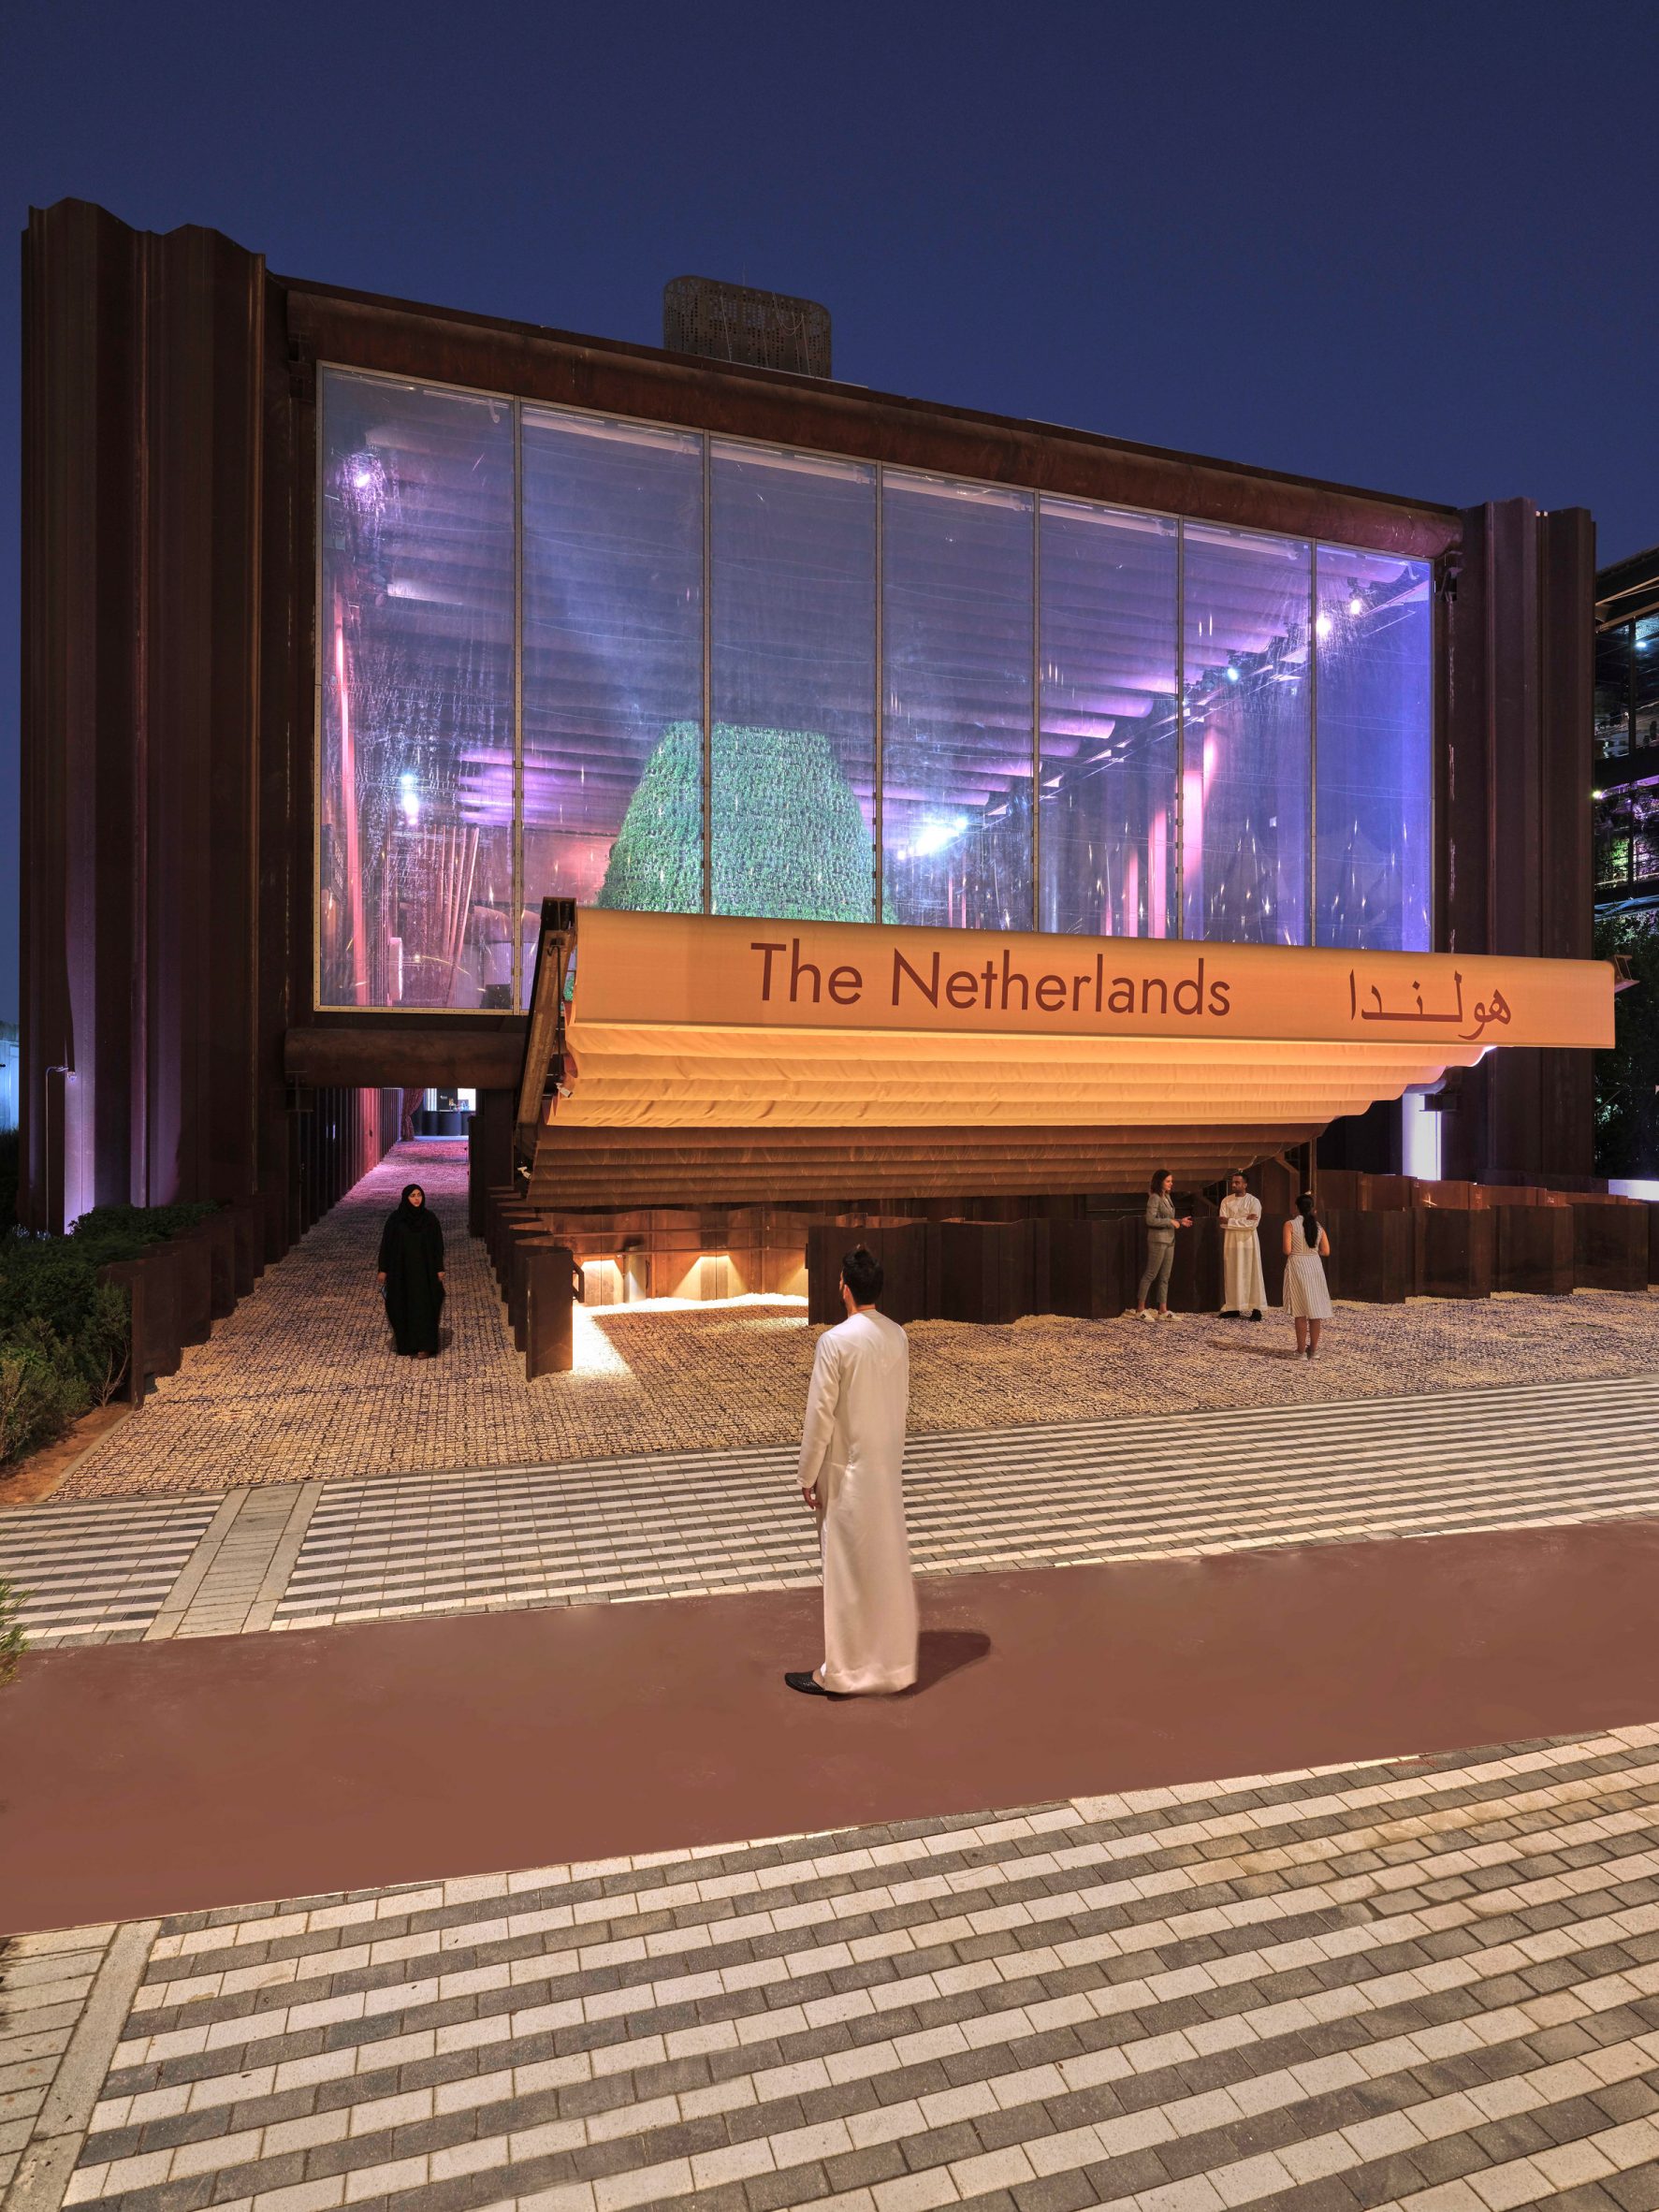 Exterior of The Netherlands' pavilion at Dubai Expo 2020